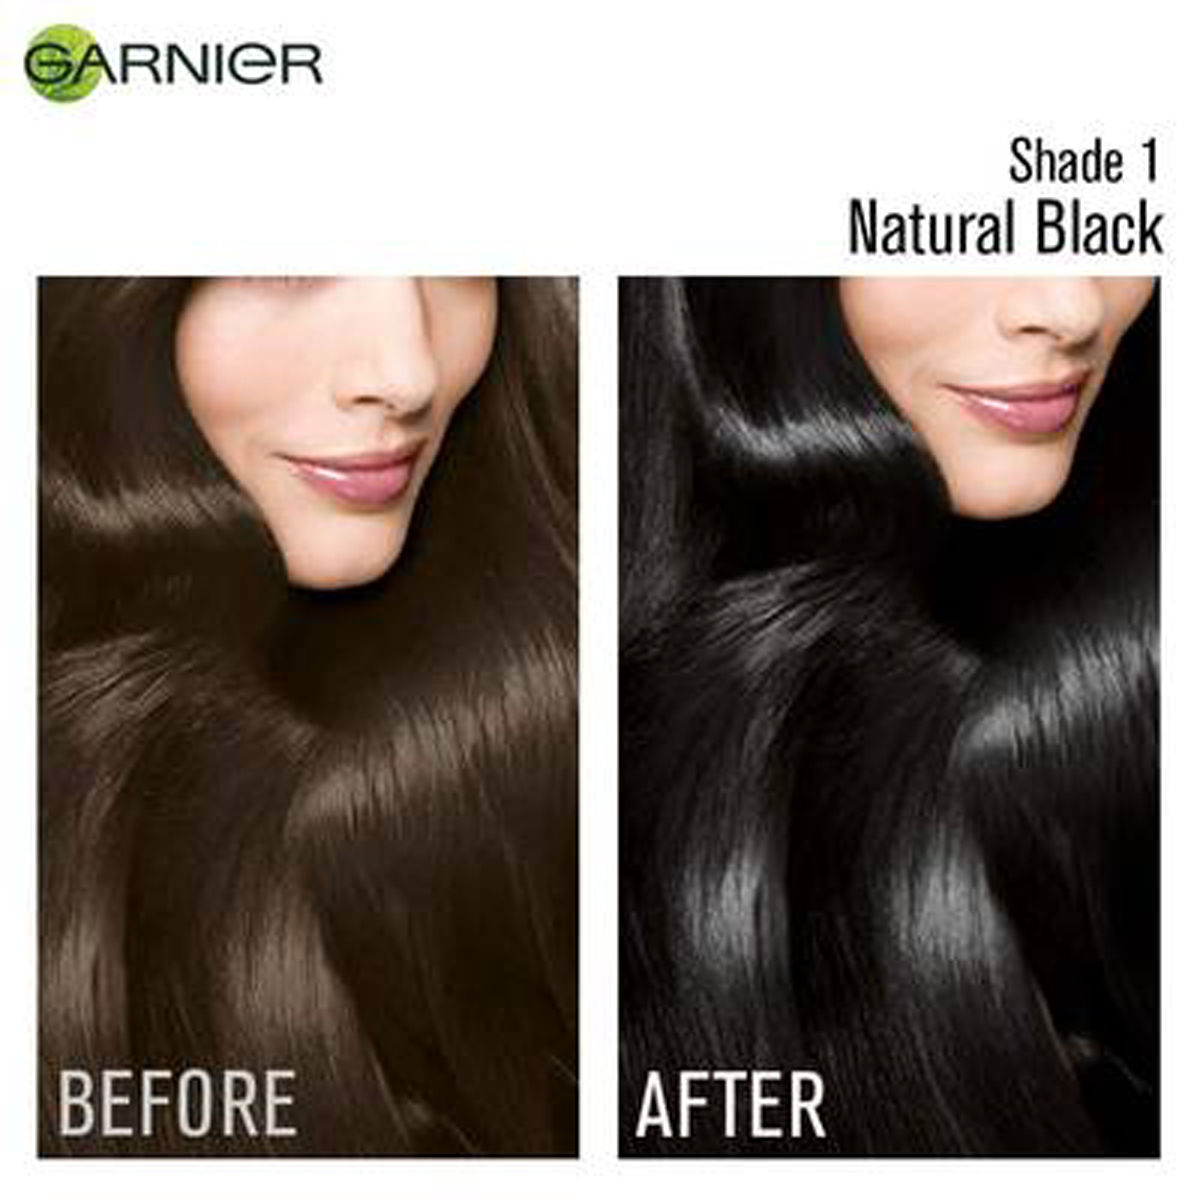 Garnier Color Naturals Creme Shade 1 Natural Black Hair Colour, 1 Kit  Price, Uses, Side Effects, Composition - Apollo Pharmacy